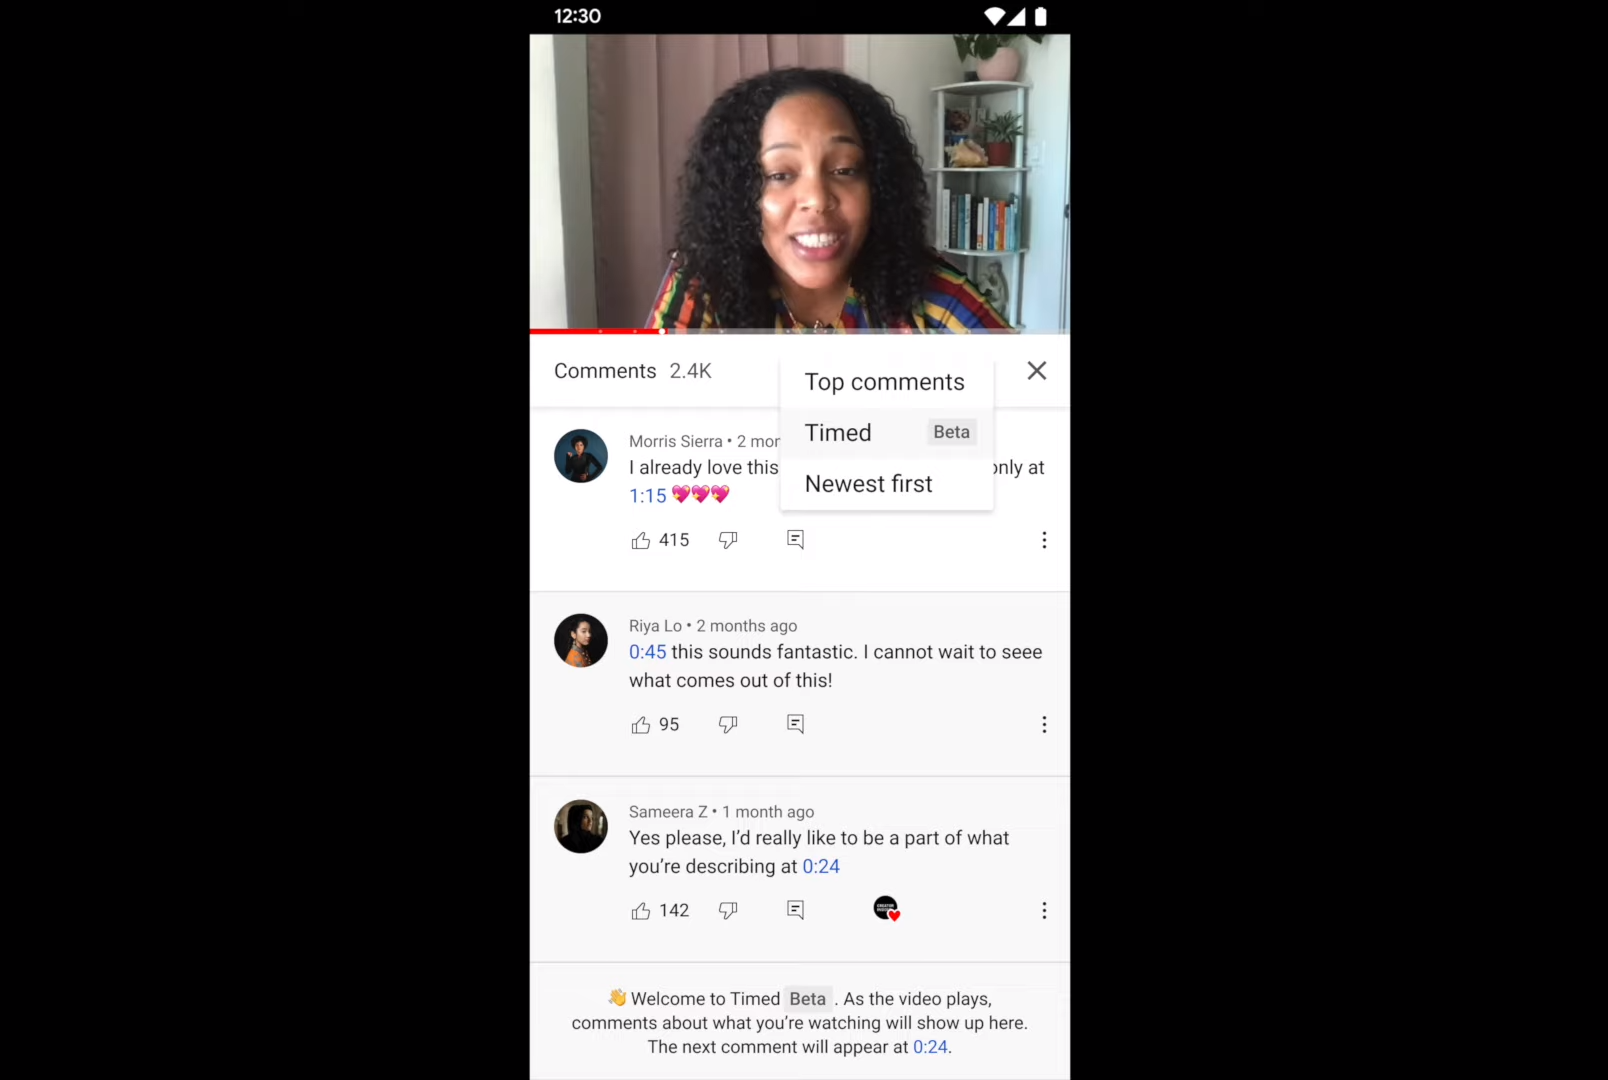 YouTube provides update on Self-Certification Feature, Timed Comments Experiment, Mobile Permissions, and More